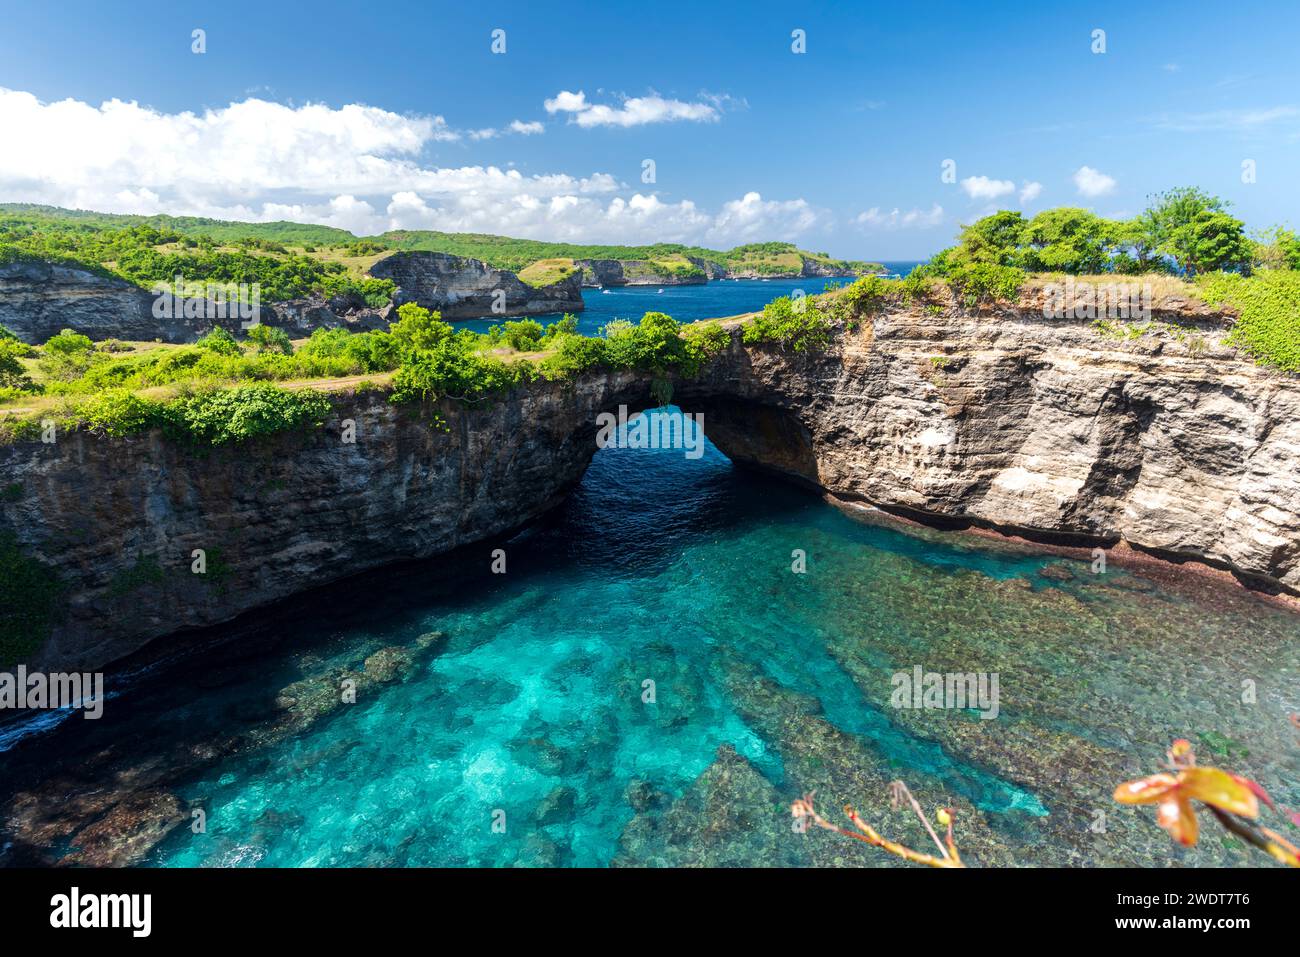 Elevated view of the tropical bay and the natural arch at the so called Broken beach, Nusa Penida, Klungkung regency, Bali, Indonesia, Southeast Asia Stock Photo